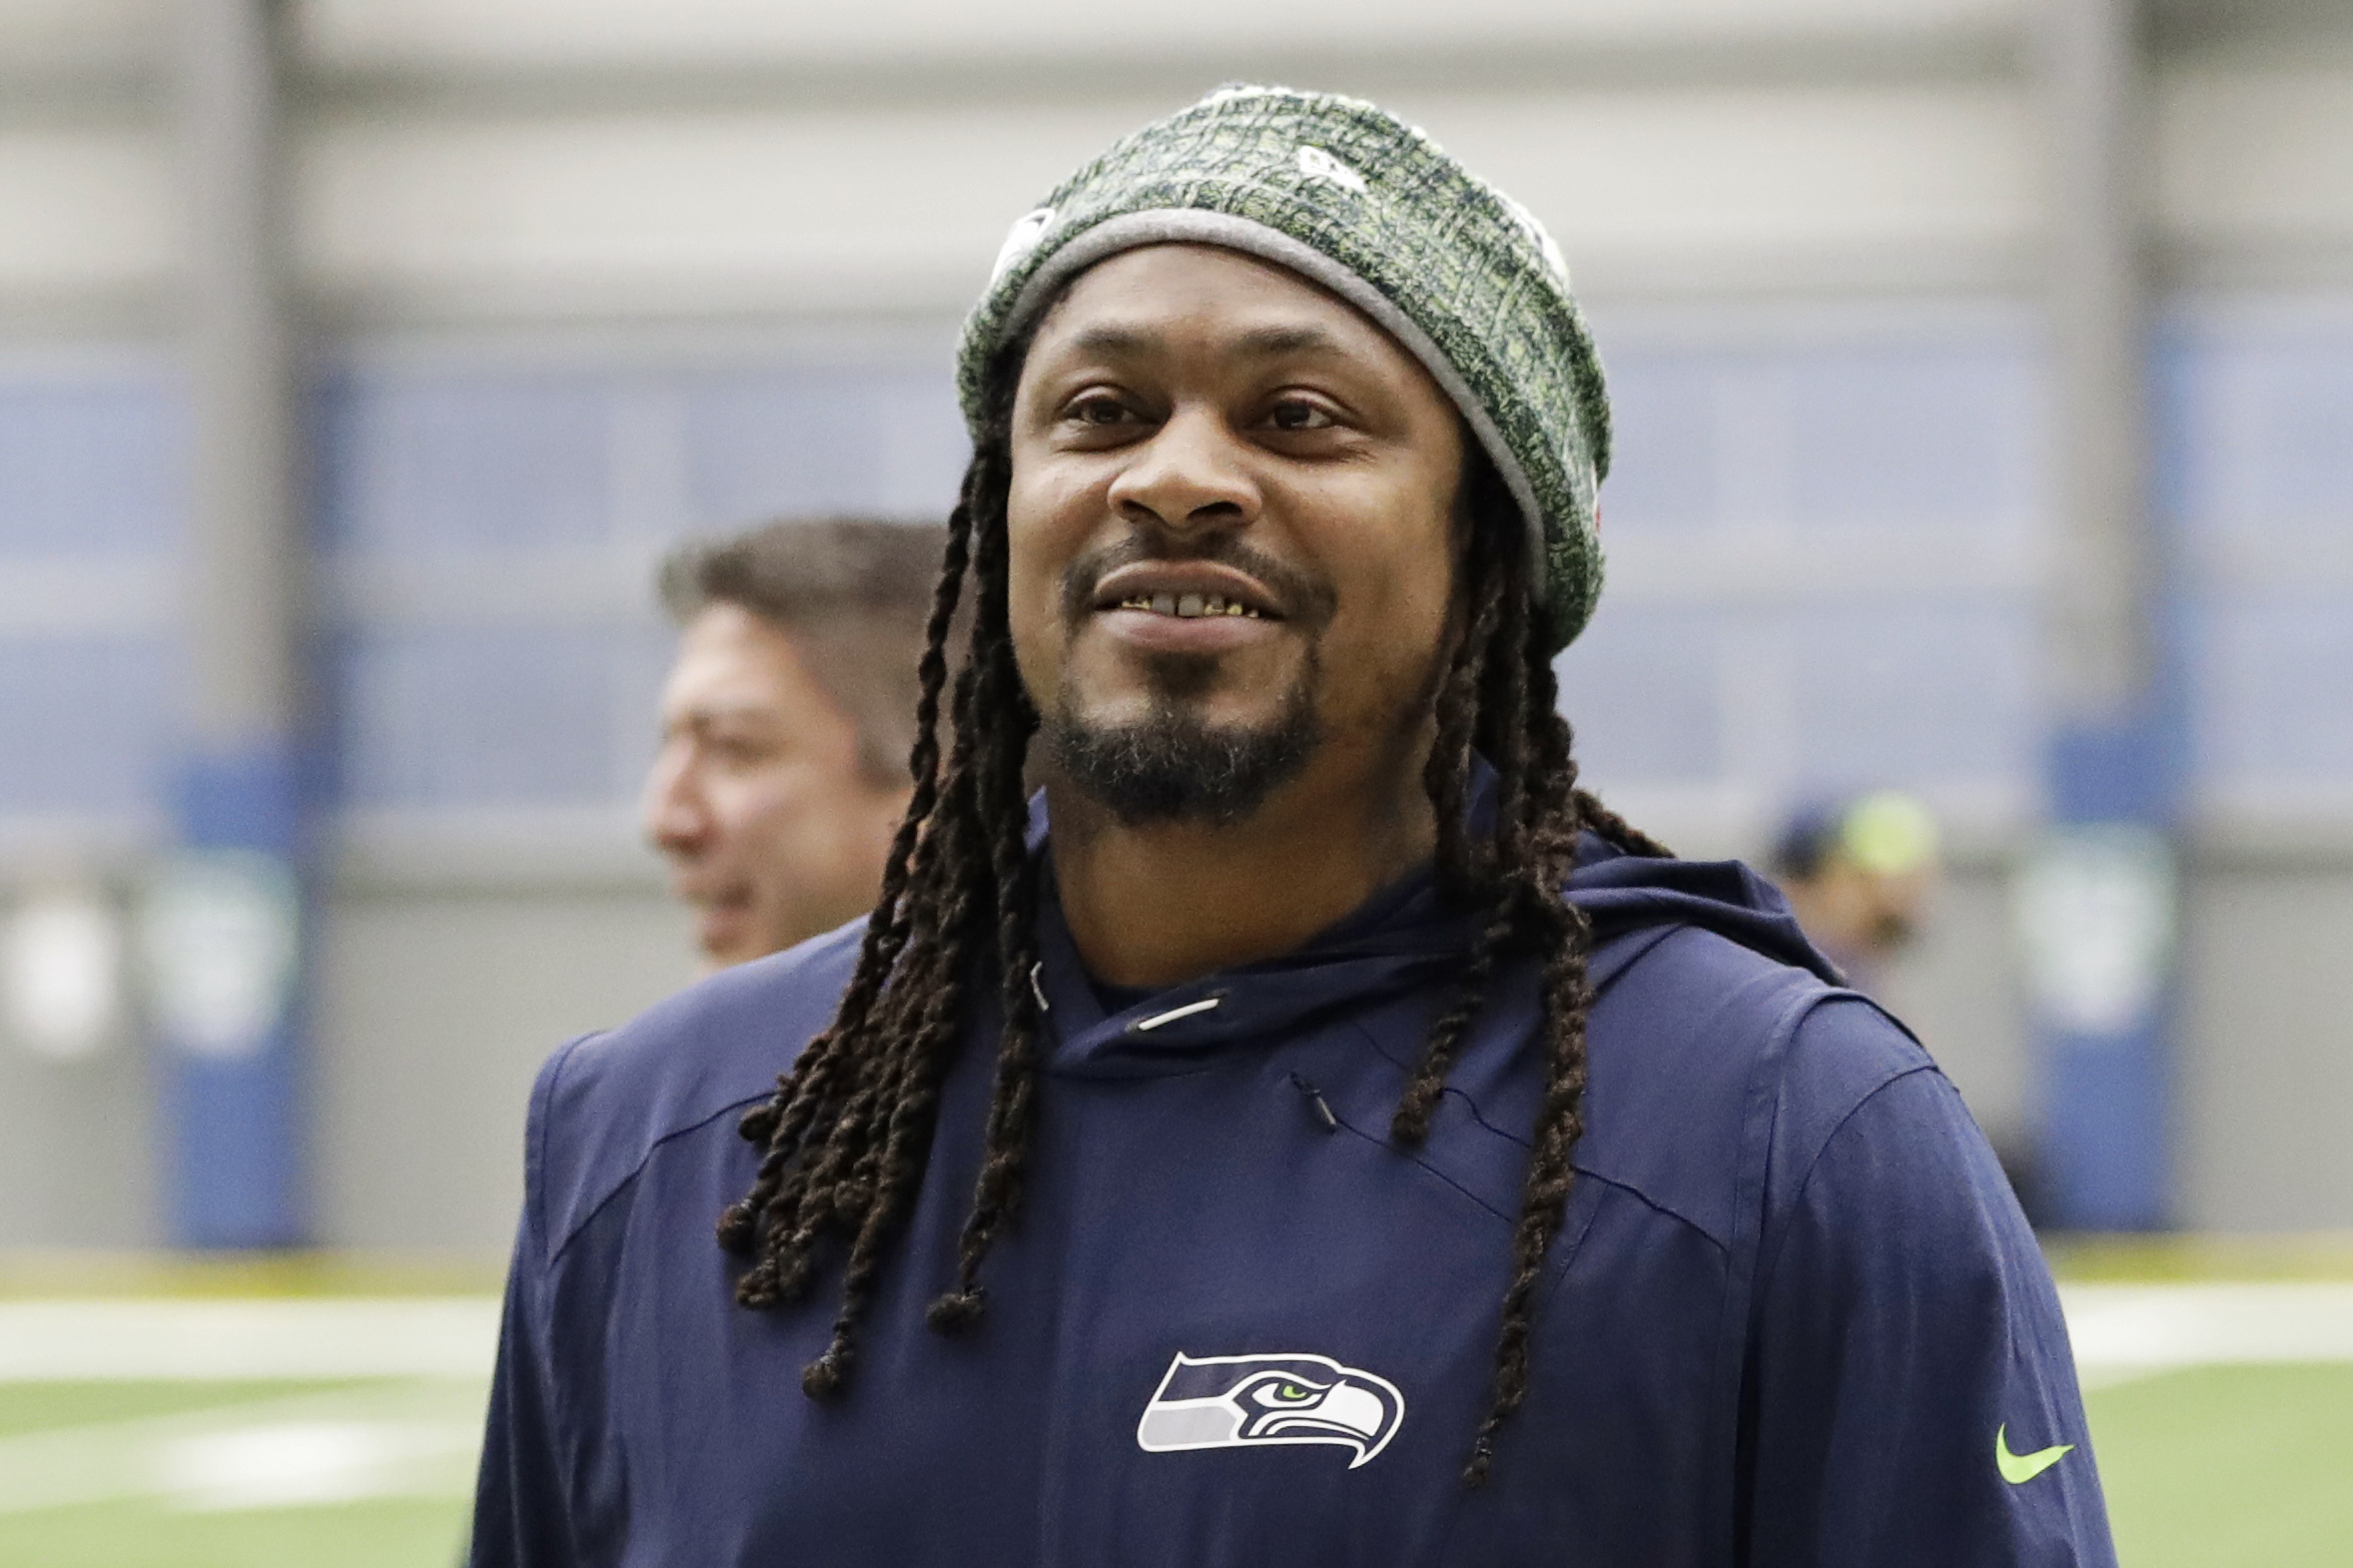 Marshawn Lynch's 'Beast Mode Apparel' Sees $150K in Sales Before